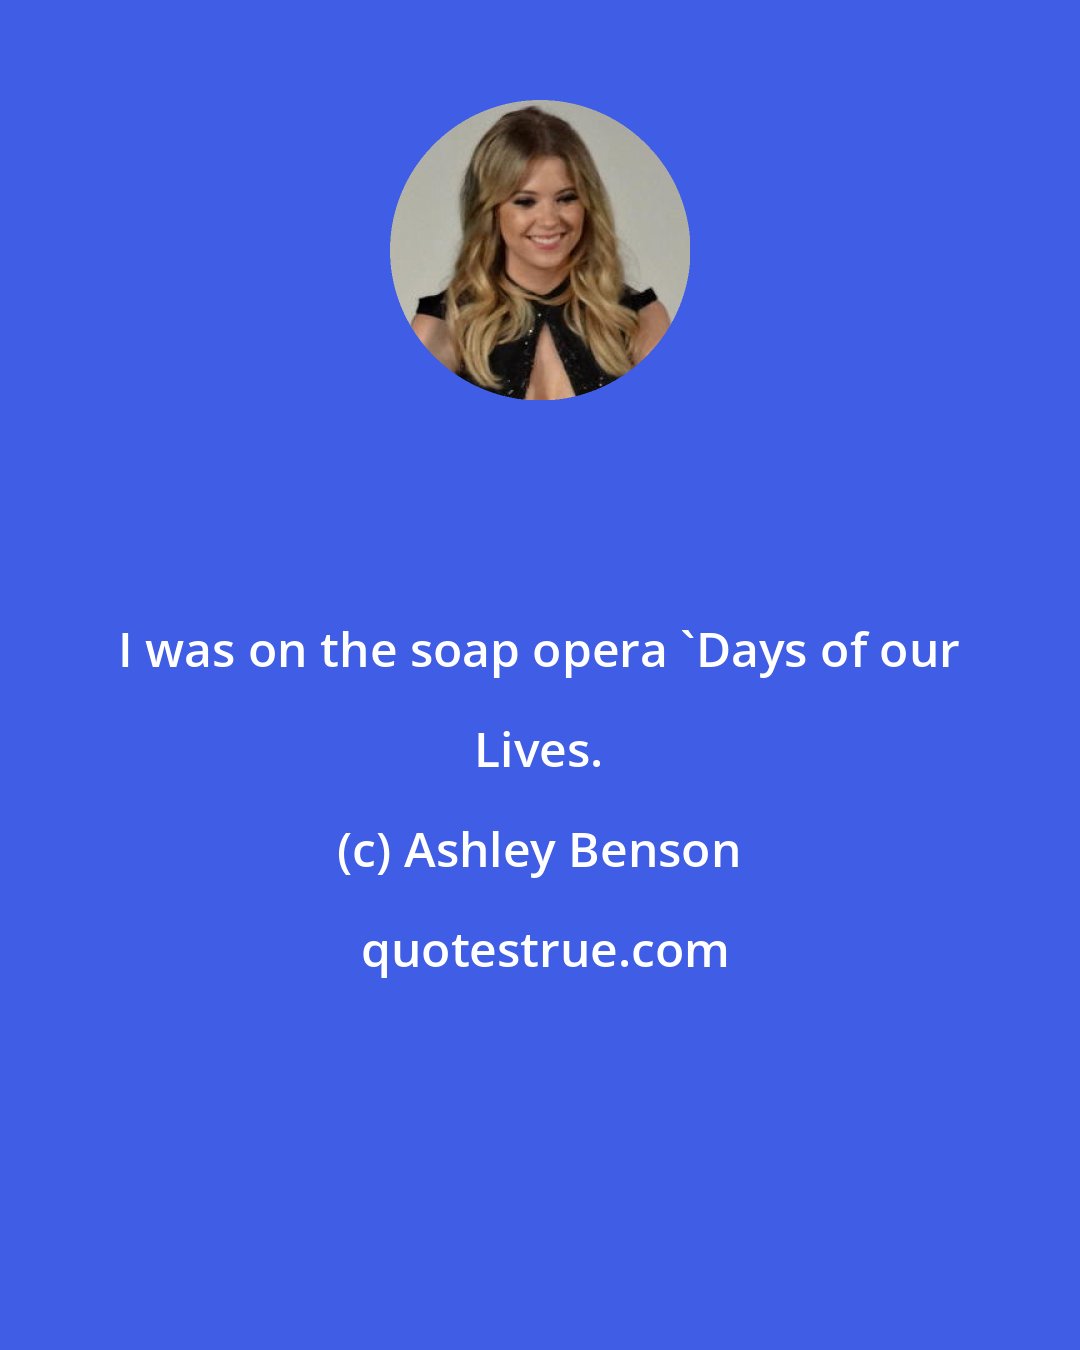 Ashley Benson: I was on the soap opera 'Days of our Lives.